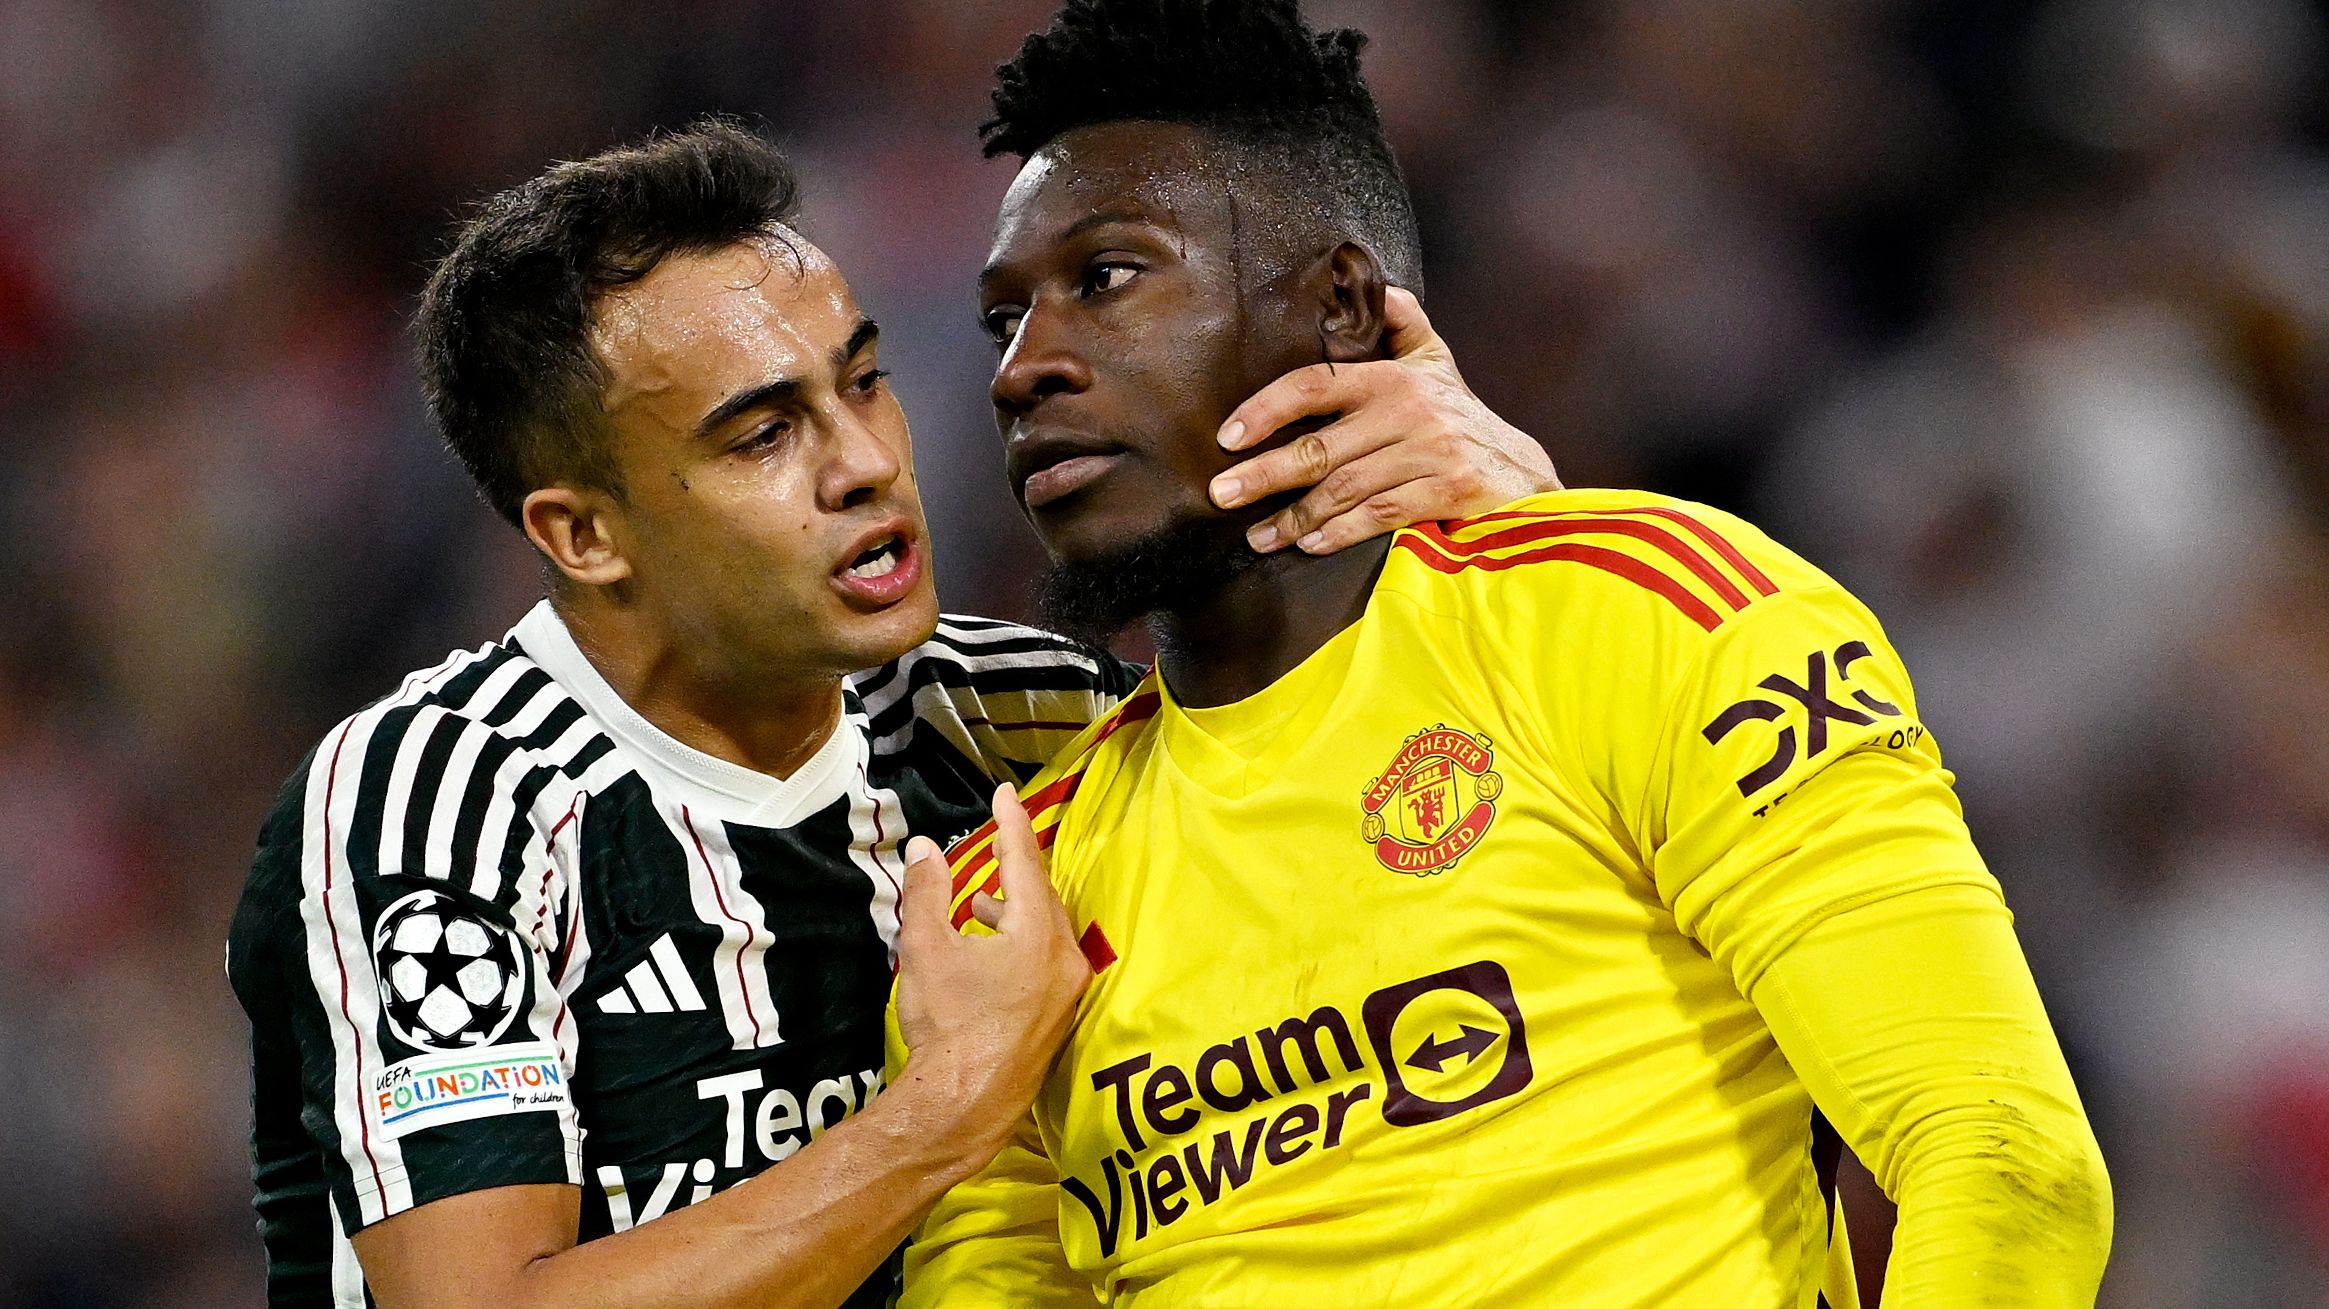 MUNICH, GERMANY - SEPTEMBER 20: Sergio Reguilon and Andre Onana of Manchester United interact during the UEFA Champions League match between FC Bayern München and Manchester United at Allianz Arena on September 20, 2023 in Munich, Germany. (Photo by Daniel Kopatsch - UEFA/UEFA via Getty Images)